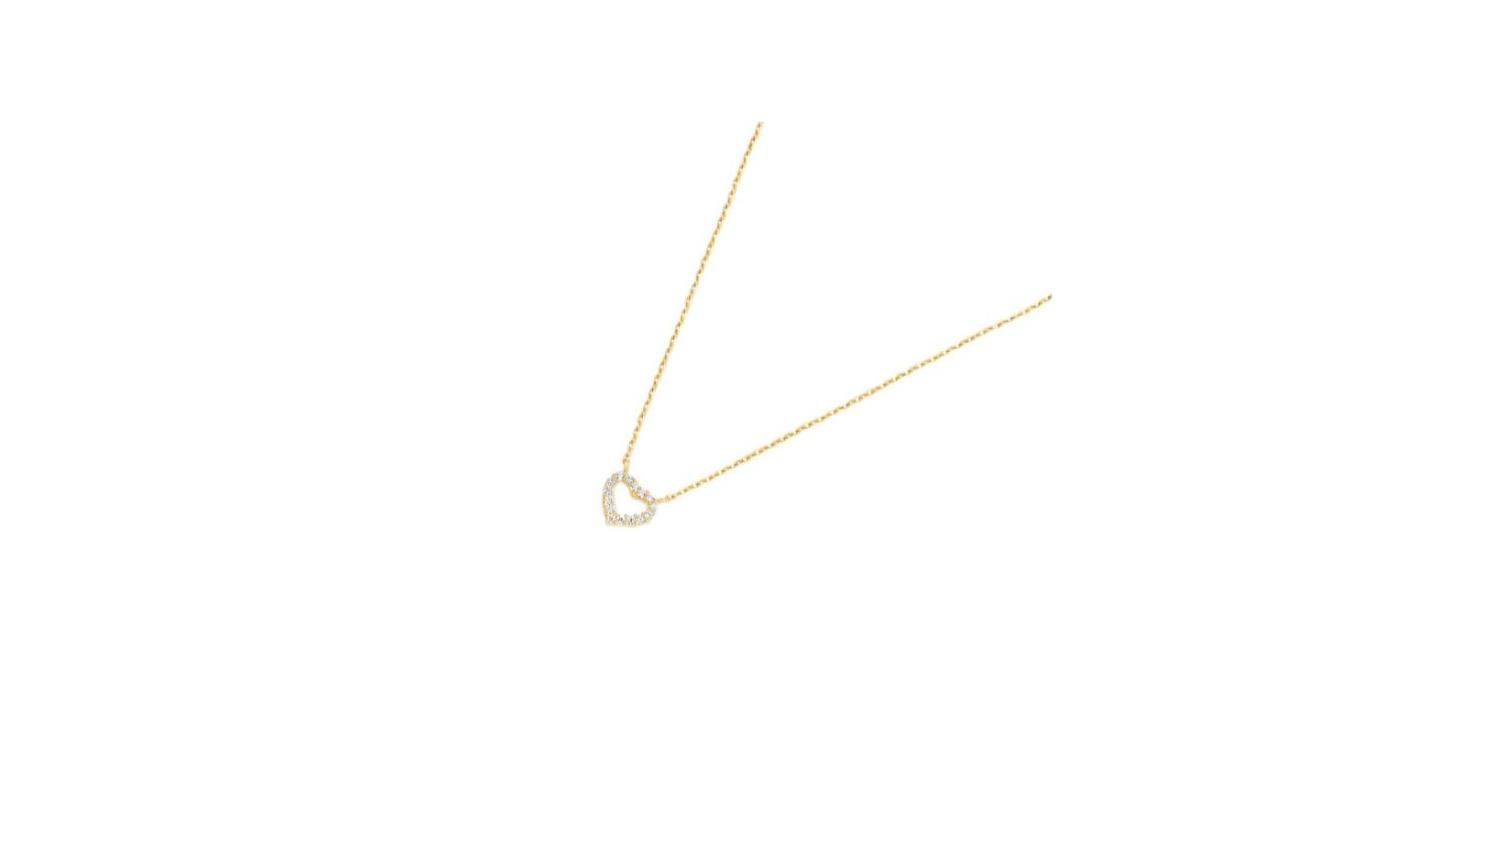 Round Cut 14k Solid Gold Heart Pendant Necklace, Tiny Heart Charm Gold Chain Necklace.